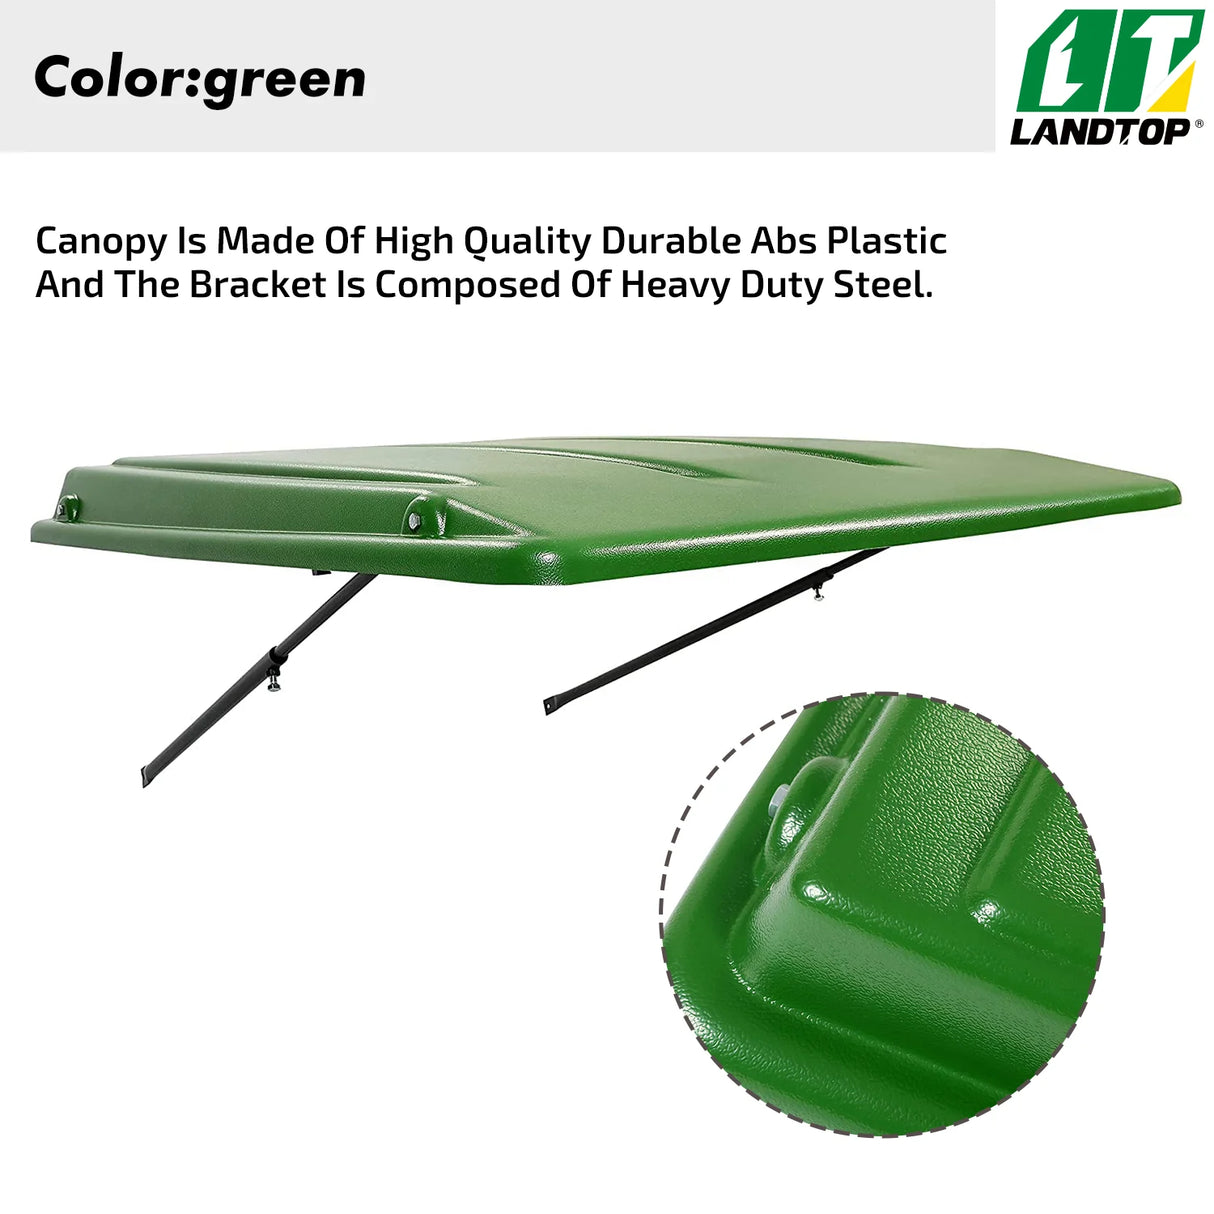 Green Tractor Canopy Compatible with John Deere Compact Utility Tractors with ROPS That are 34" Wide or Less Compatible with 1 1/2" x 3", 2" x 2" or 2" x 3" ROPS, 35" Wide X 40" Long